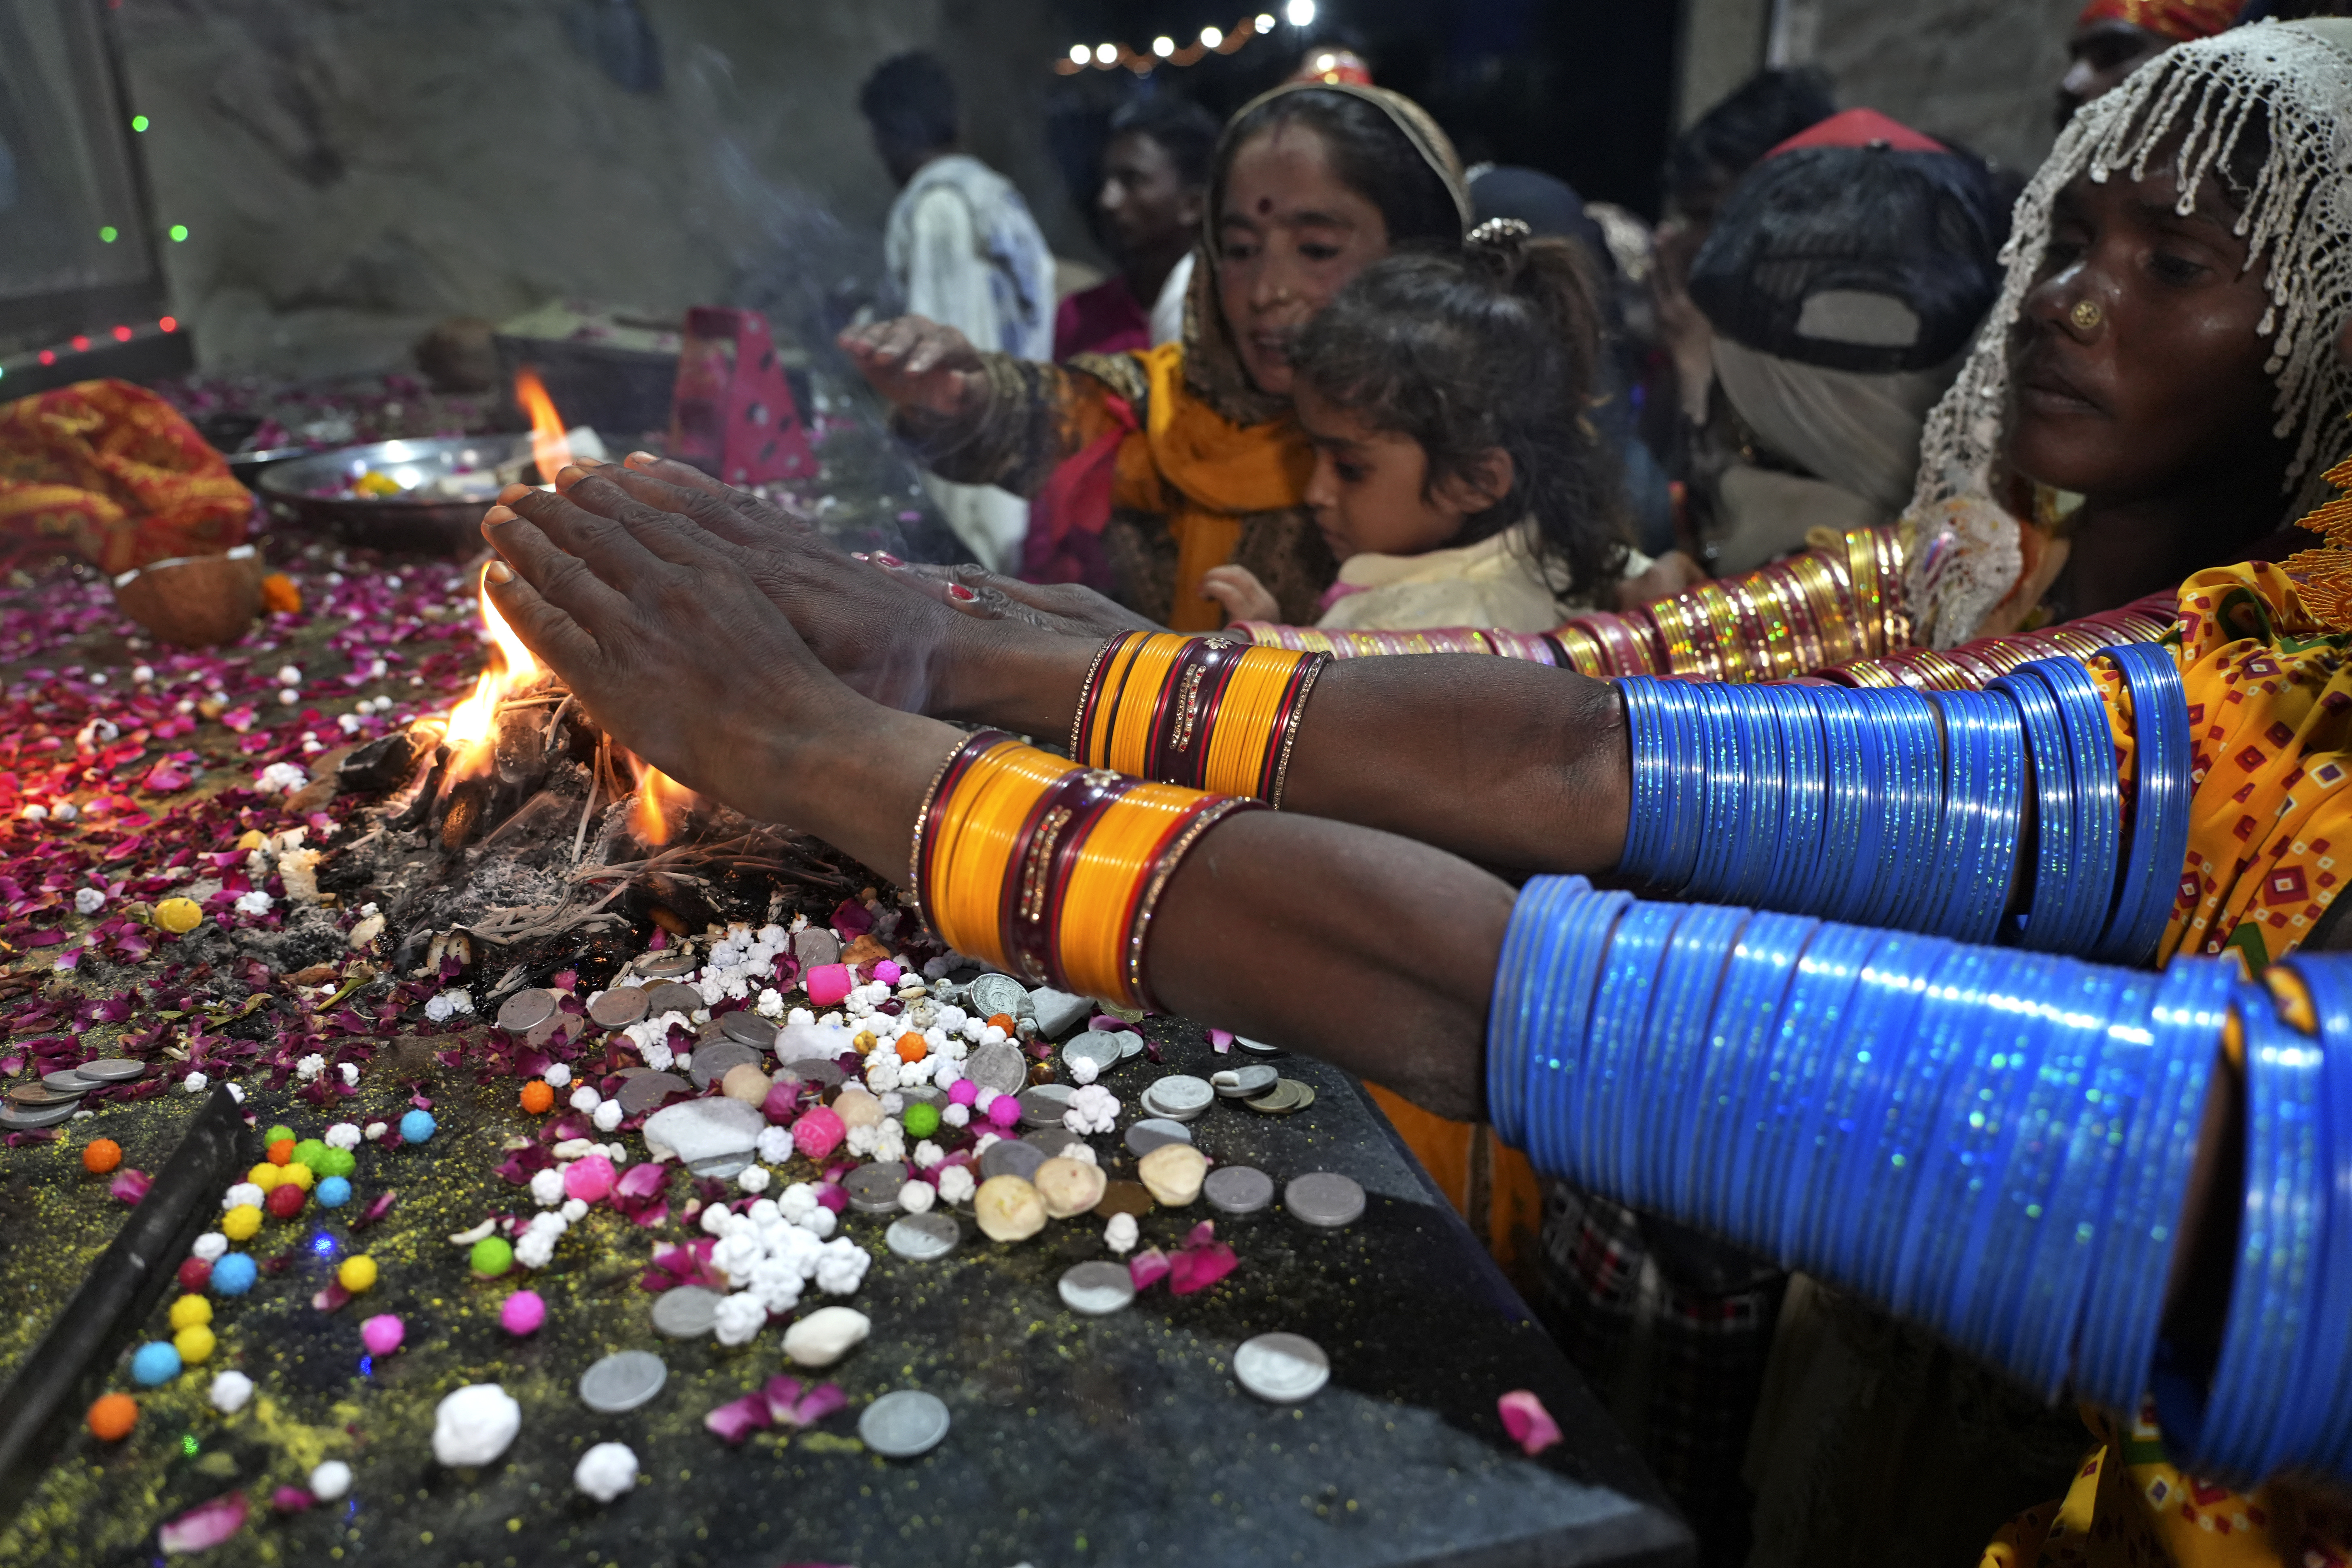 Hindu devotees perform their rituals during an annual festival in an ancient cave temple of Hinglaj Mata in Hinglaj in Lasbela district in Pakistan's southwestern Baluchistan province, Friday, April 26